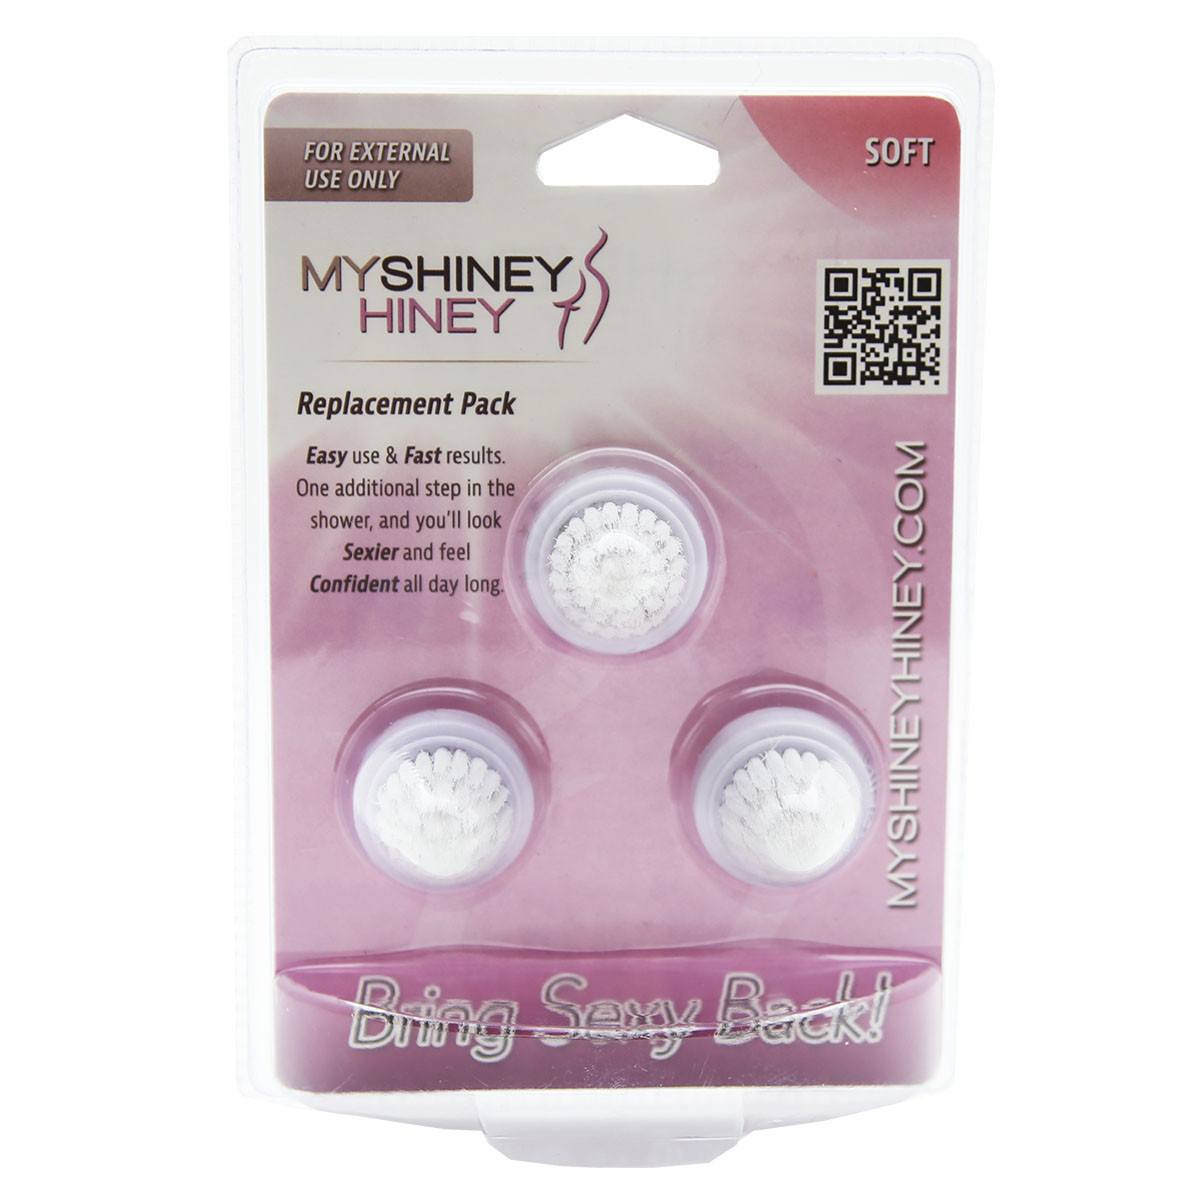 Replacement Heads - My Shiney Hiney Personal Cleansing Kit Soft Replacement Heads (3pk)